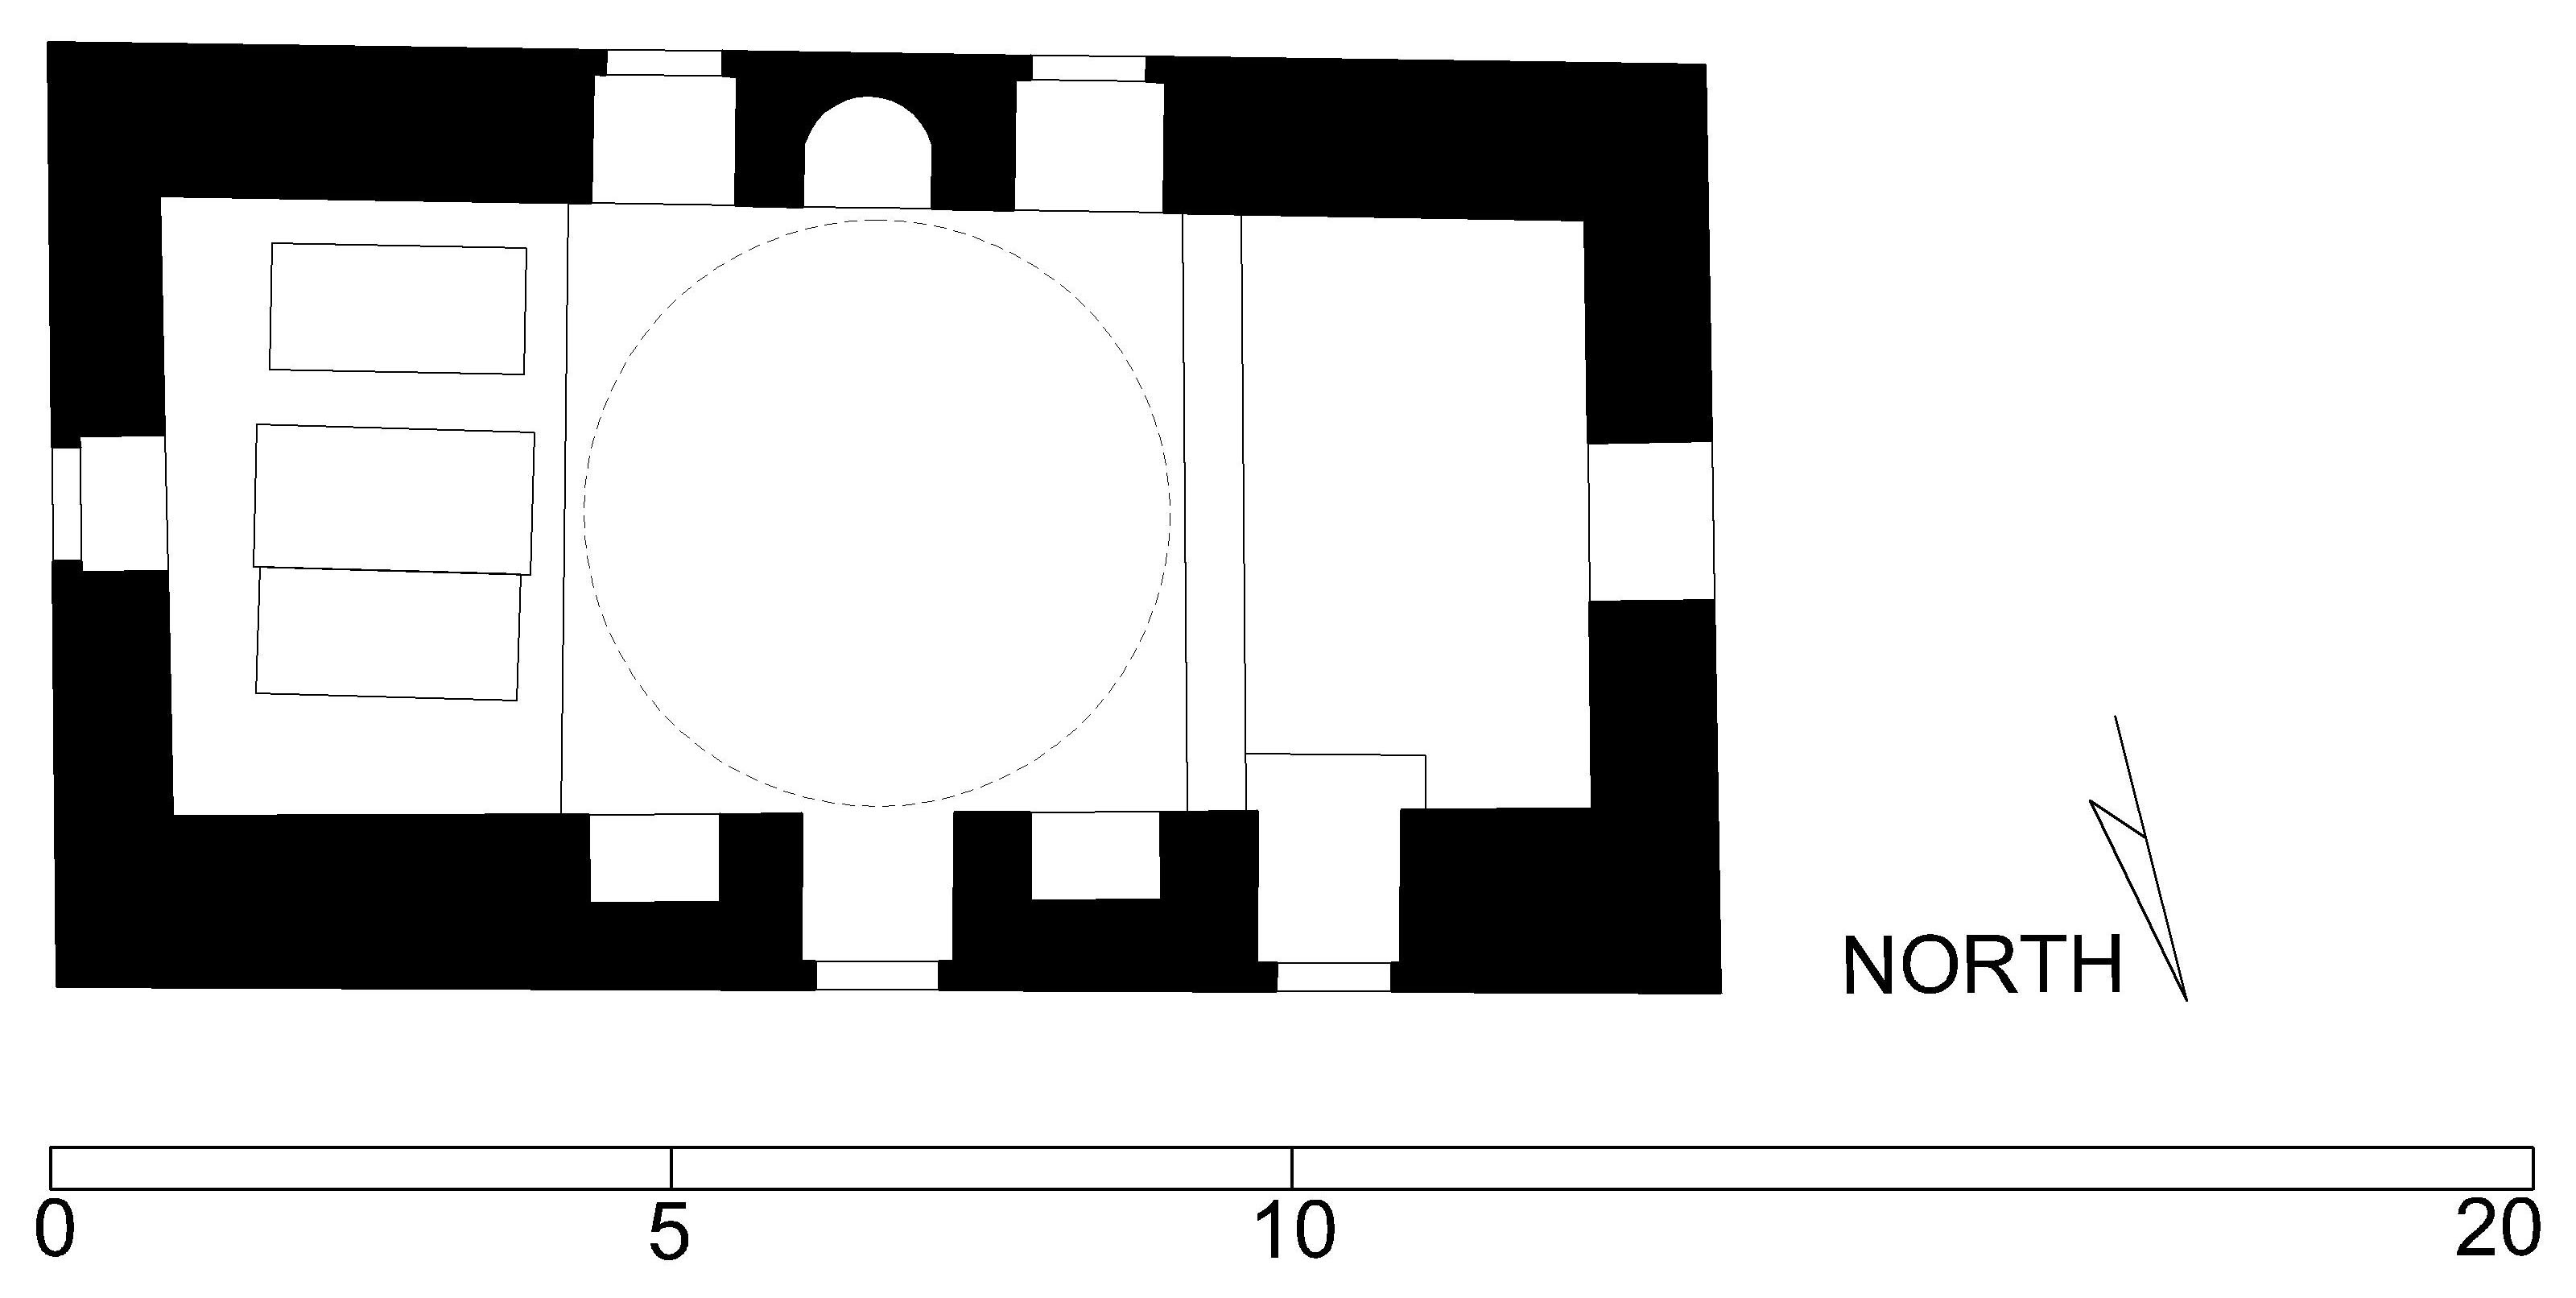 Turba Musa ibn 'Abdullah al-Nasiri - Floor plan of mausoleum (after Meinecke) in AutoCAD 2000 format. Click the download button to download a zipped file containing the .dwg file.